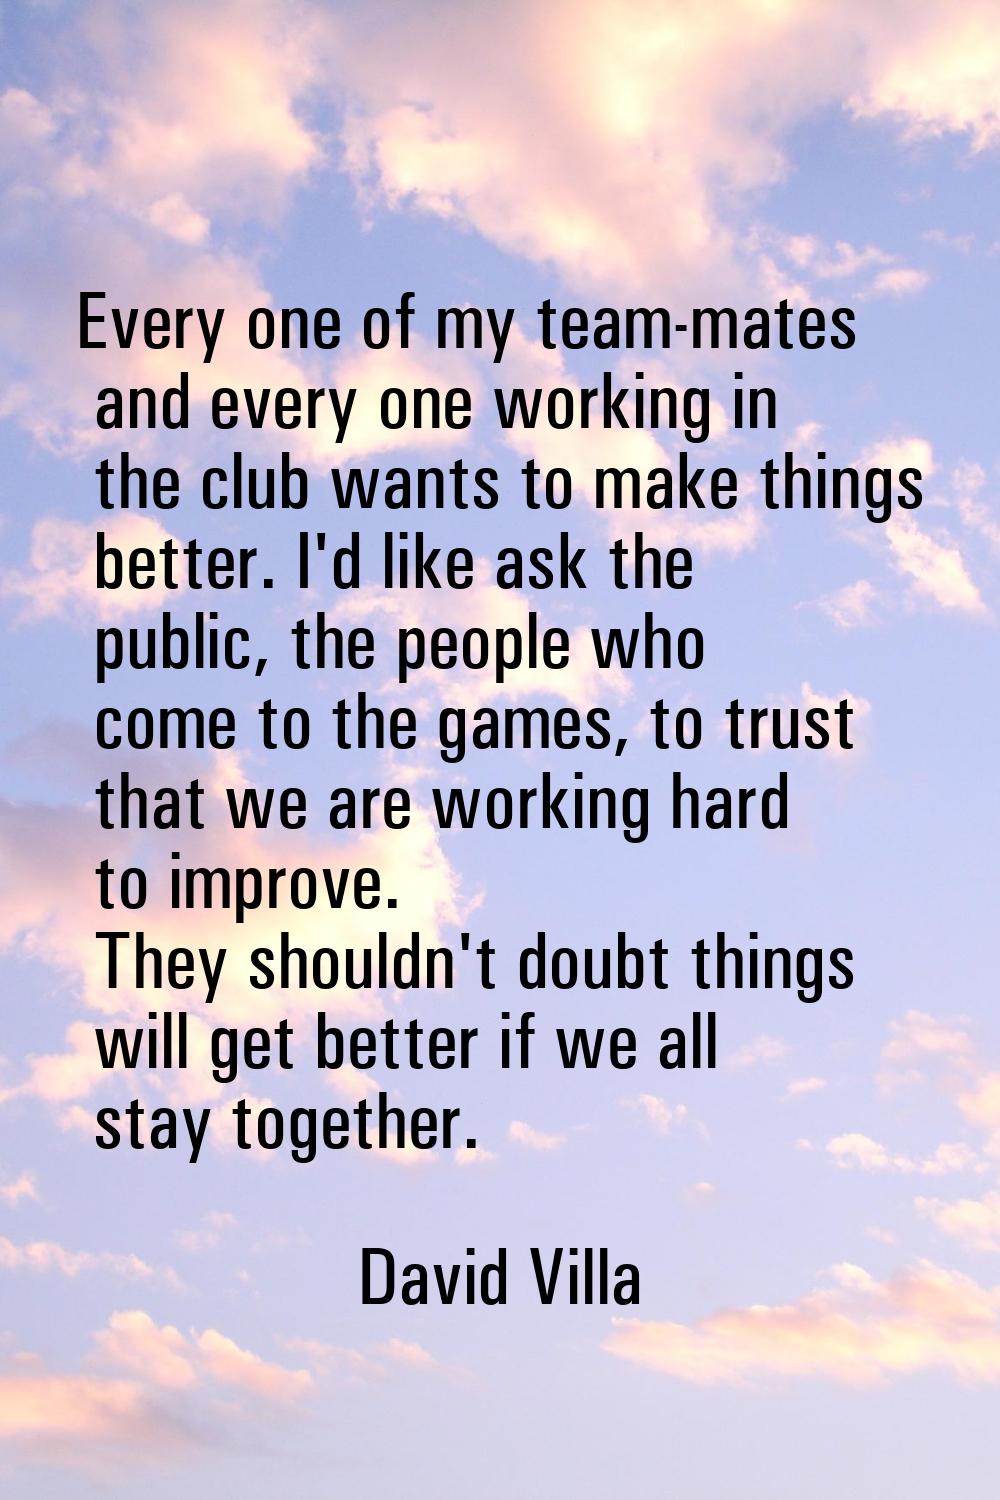 Every one of my team-mates and every one working in the club wants to make things better. I'd like 